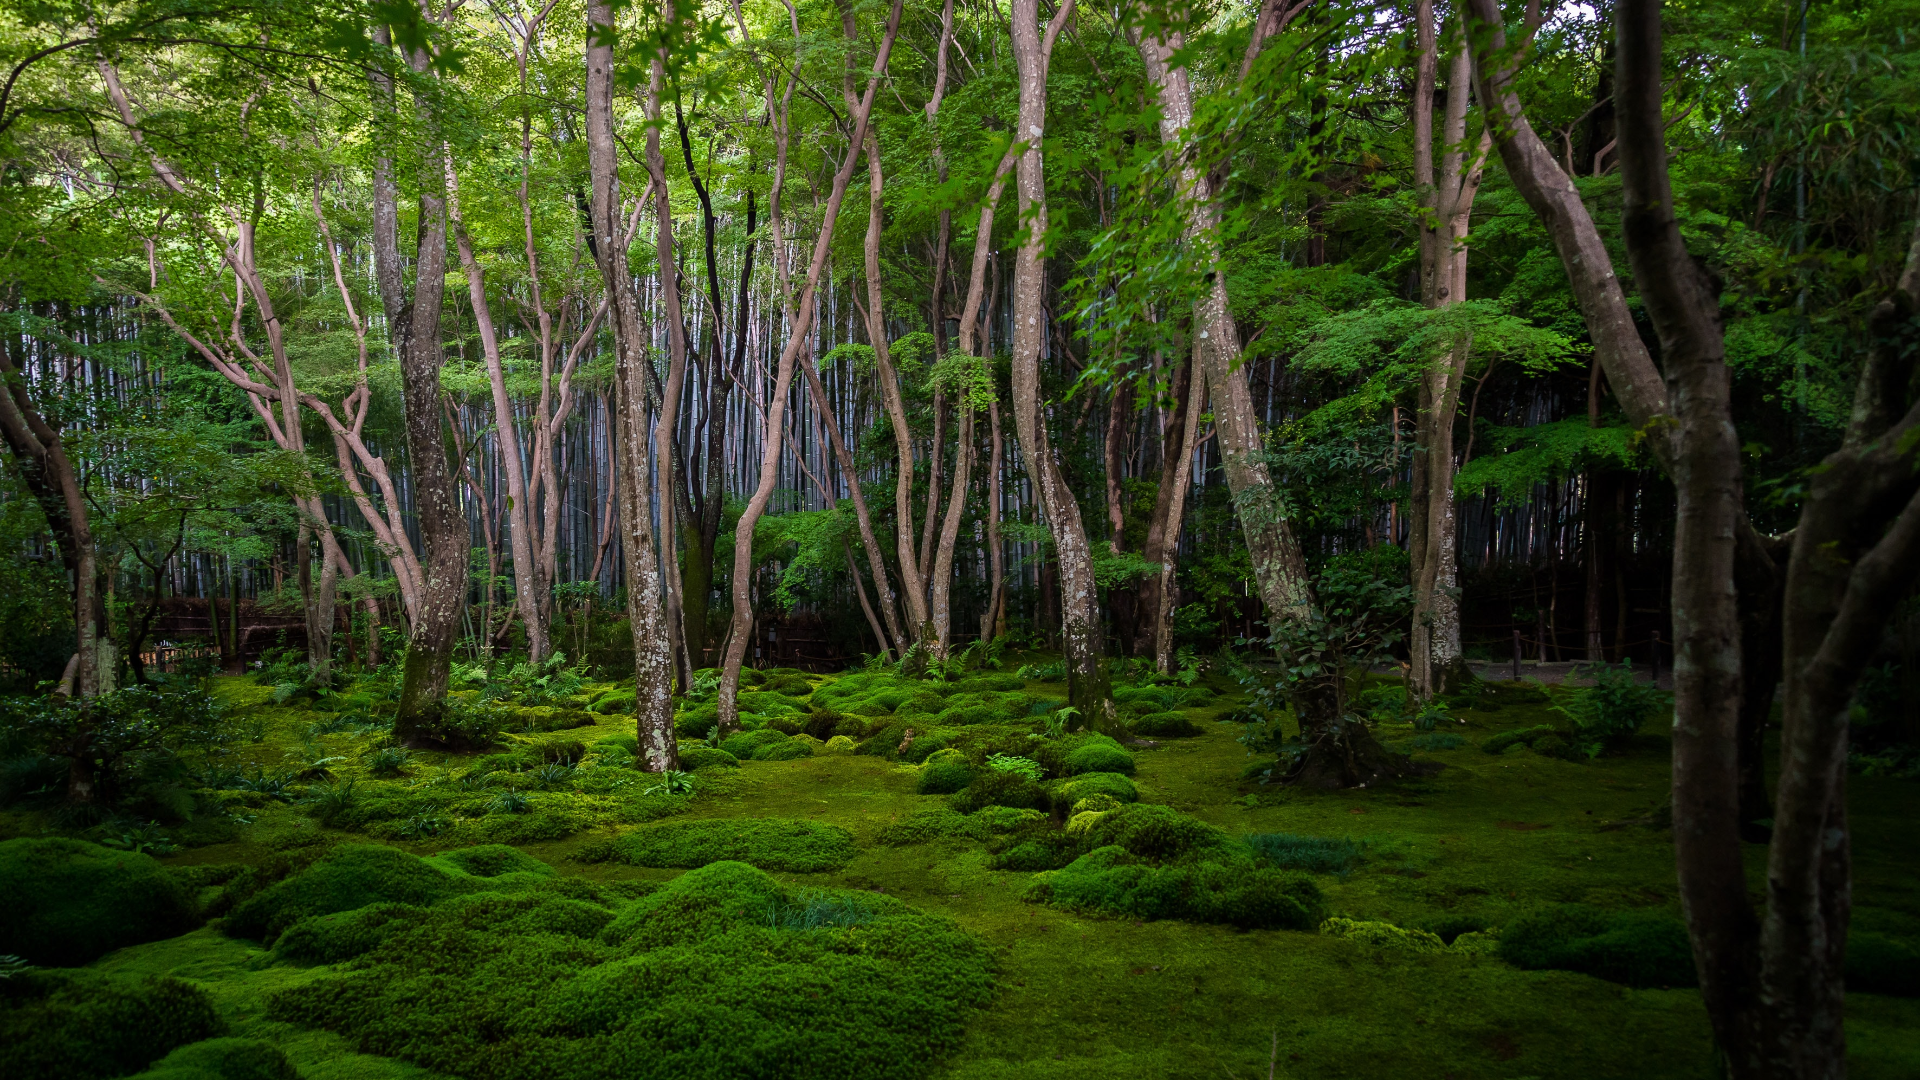 General 1920x1080 nature trees plants grass forest rainforest Kyoto Japan Asia outdoors